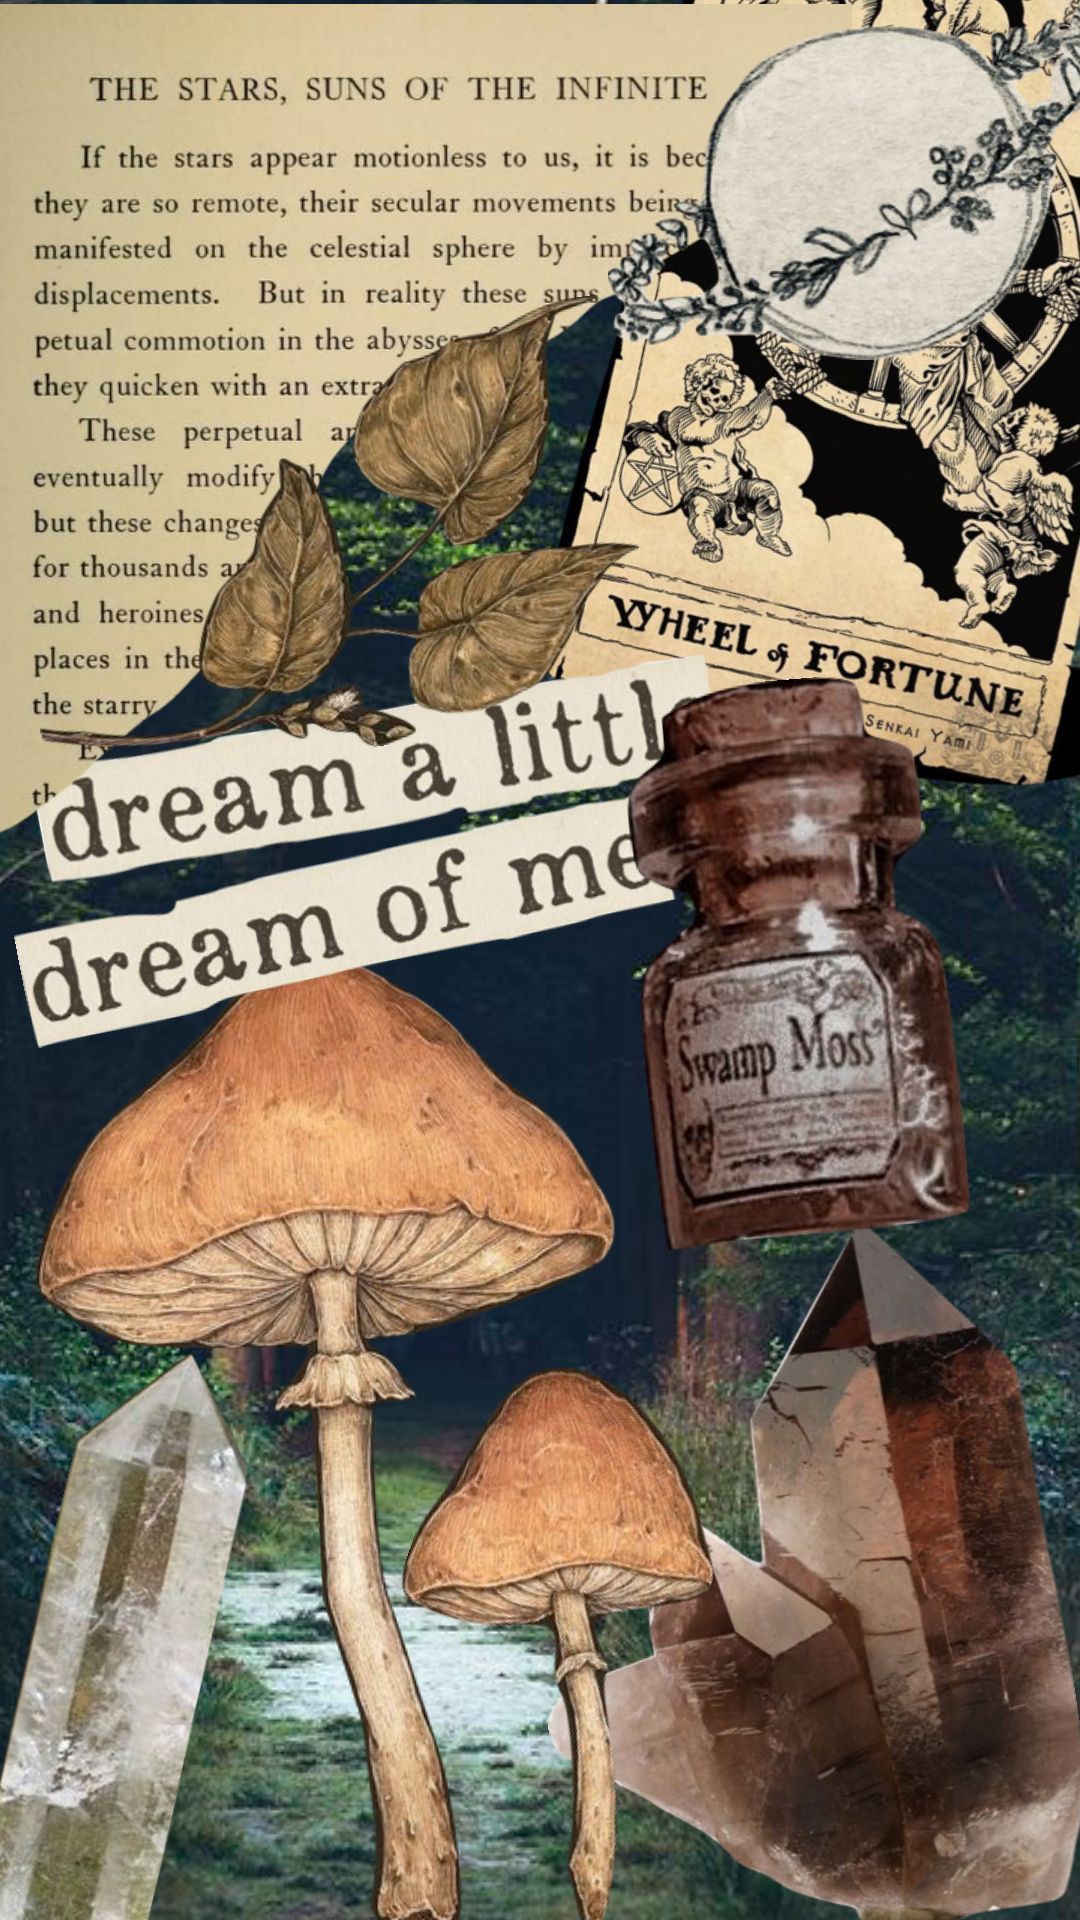 Collage of mushrooms, leaves, crystals, and a bottle of swamp moss. - Witchcore